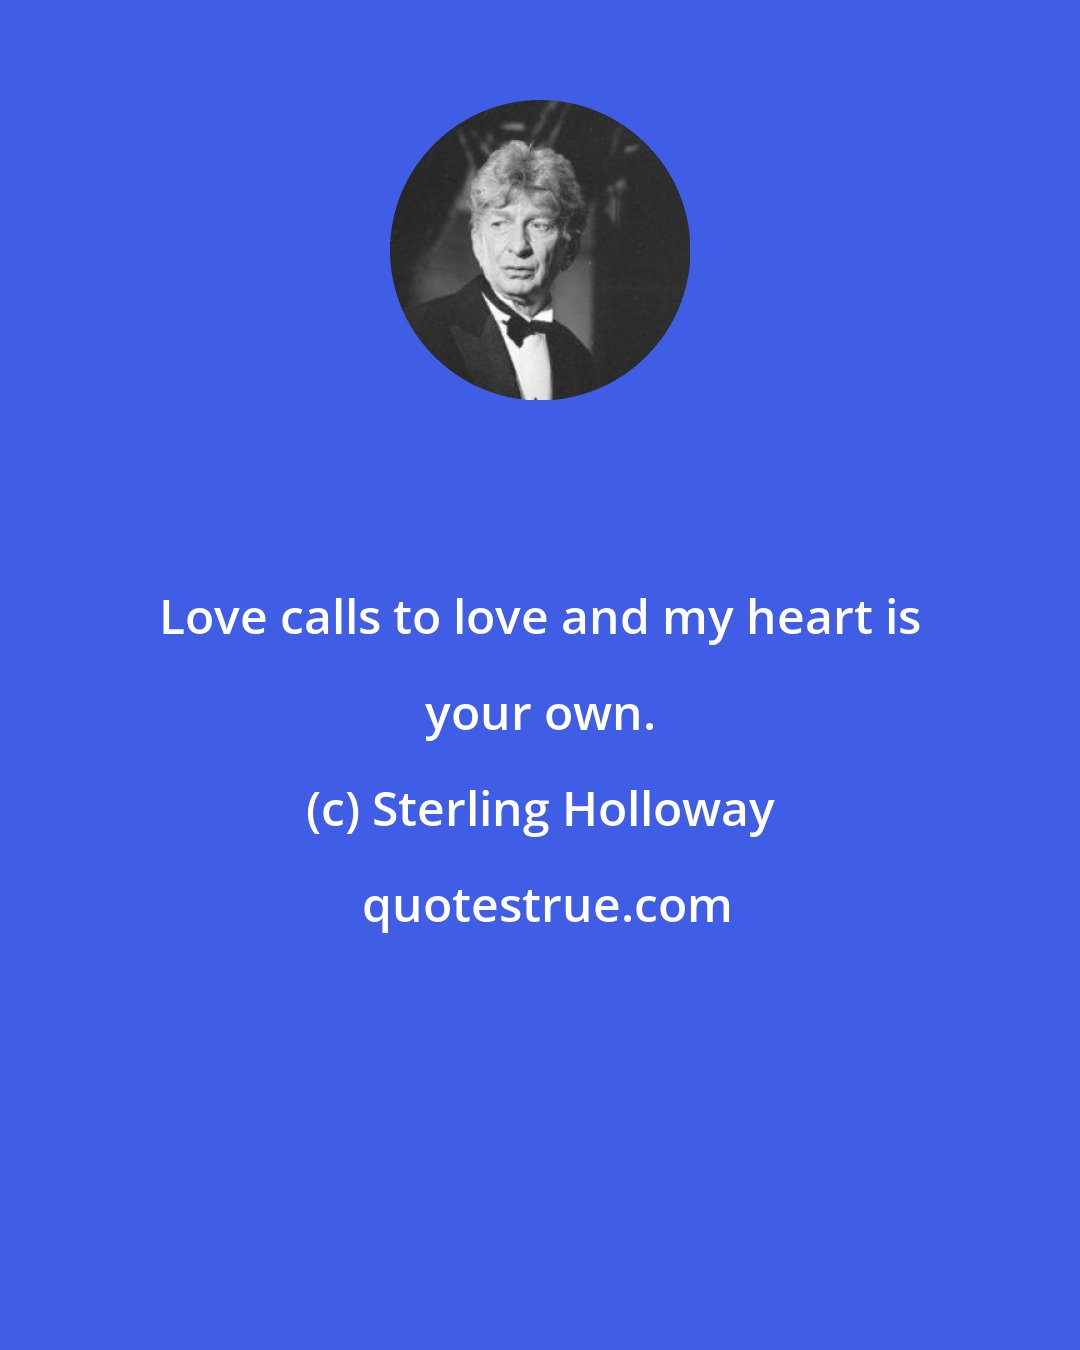 Sterling Holloway: Love calls to love and my heart is your own.